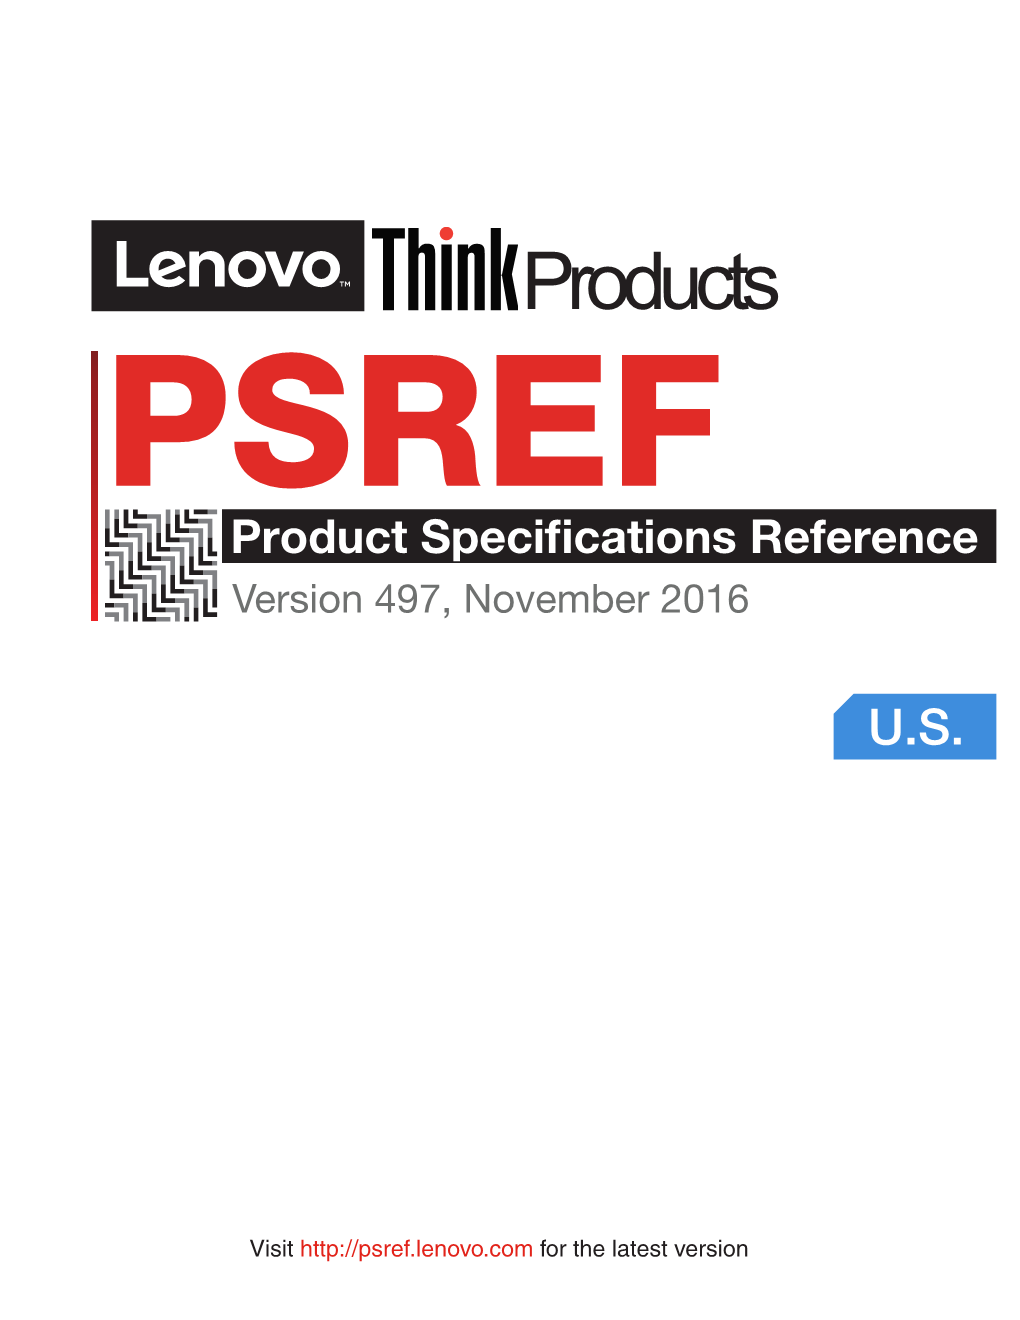 Product Specifications Reference Version 497, November 2016